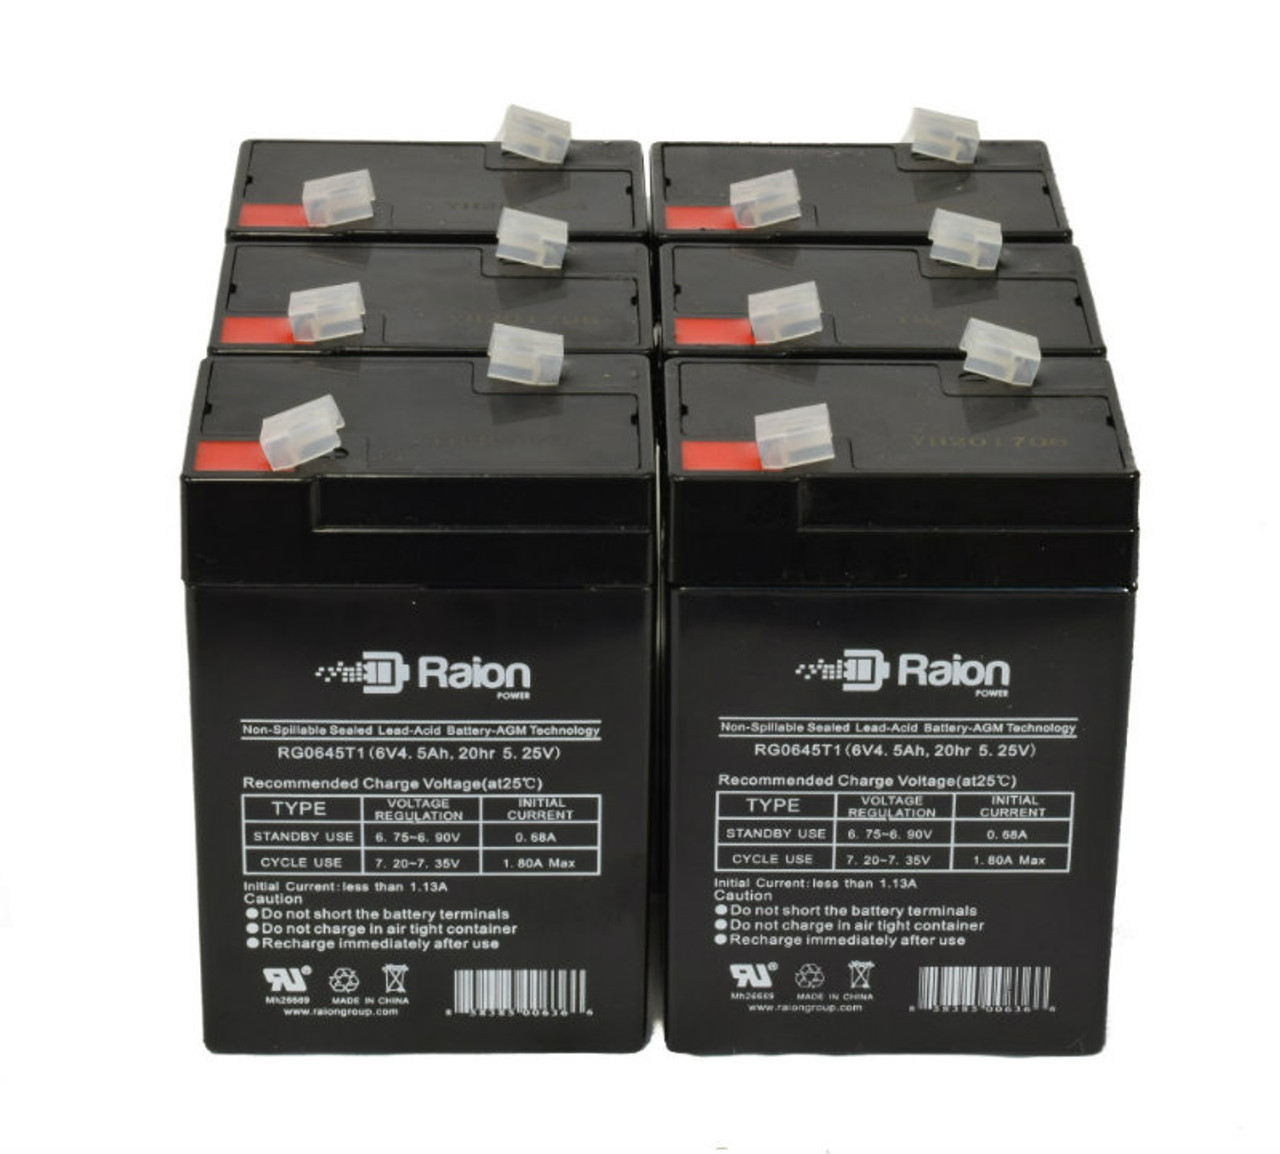 Raion Power RG0645T1 6V 4.5Ah Replacement Medical Equipment Battery for Philips H102 - 6 Pack